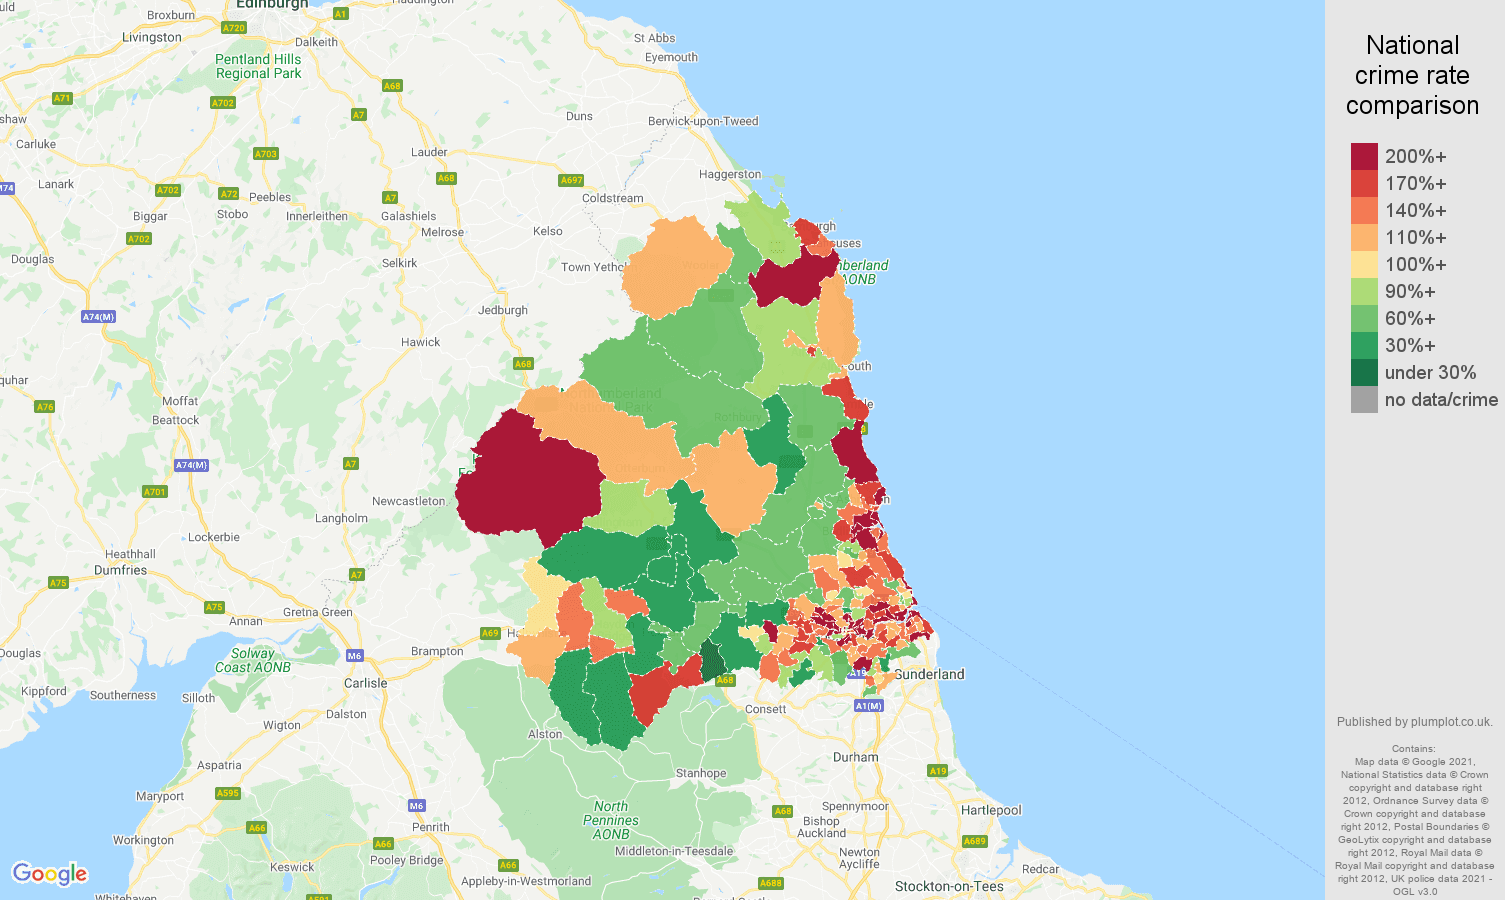 Newcastle upon Tyne antisocial behaviour crime rate comparison map